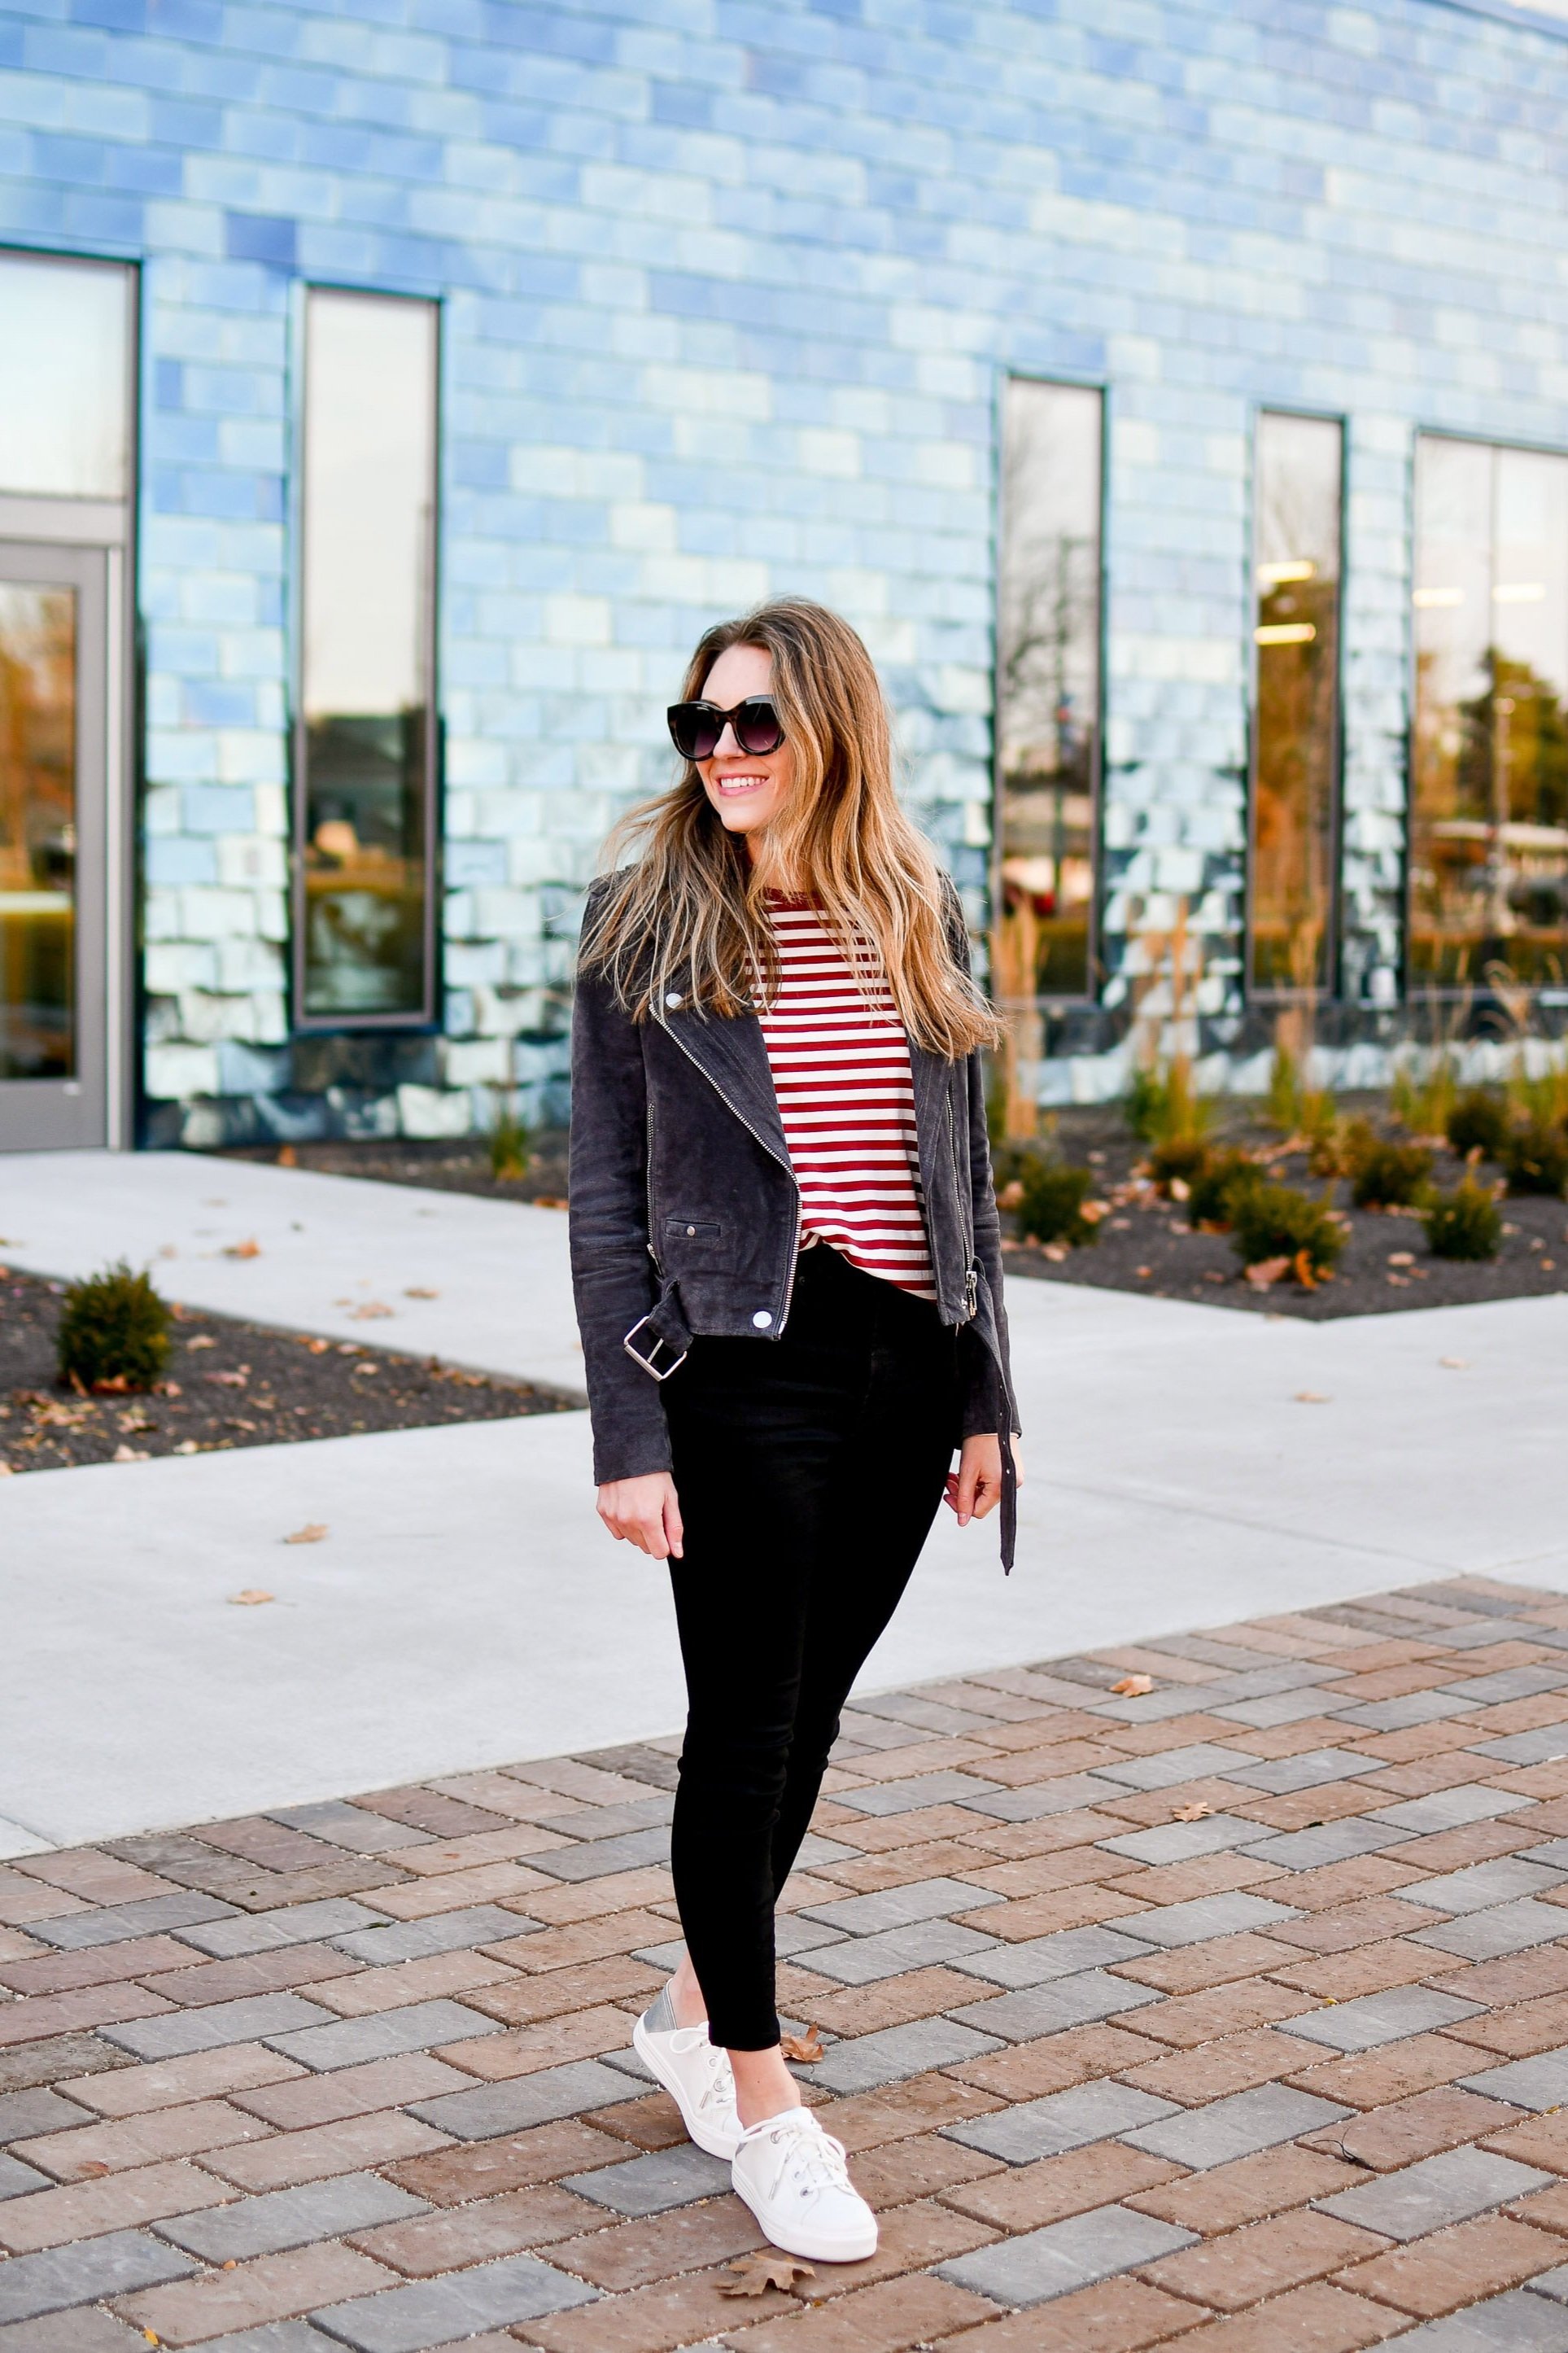 Black Jacket with Leggings Relaxed Summer Outfits (6 ideas & outfits)